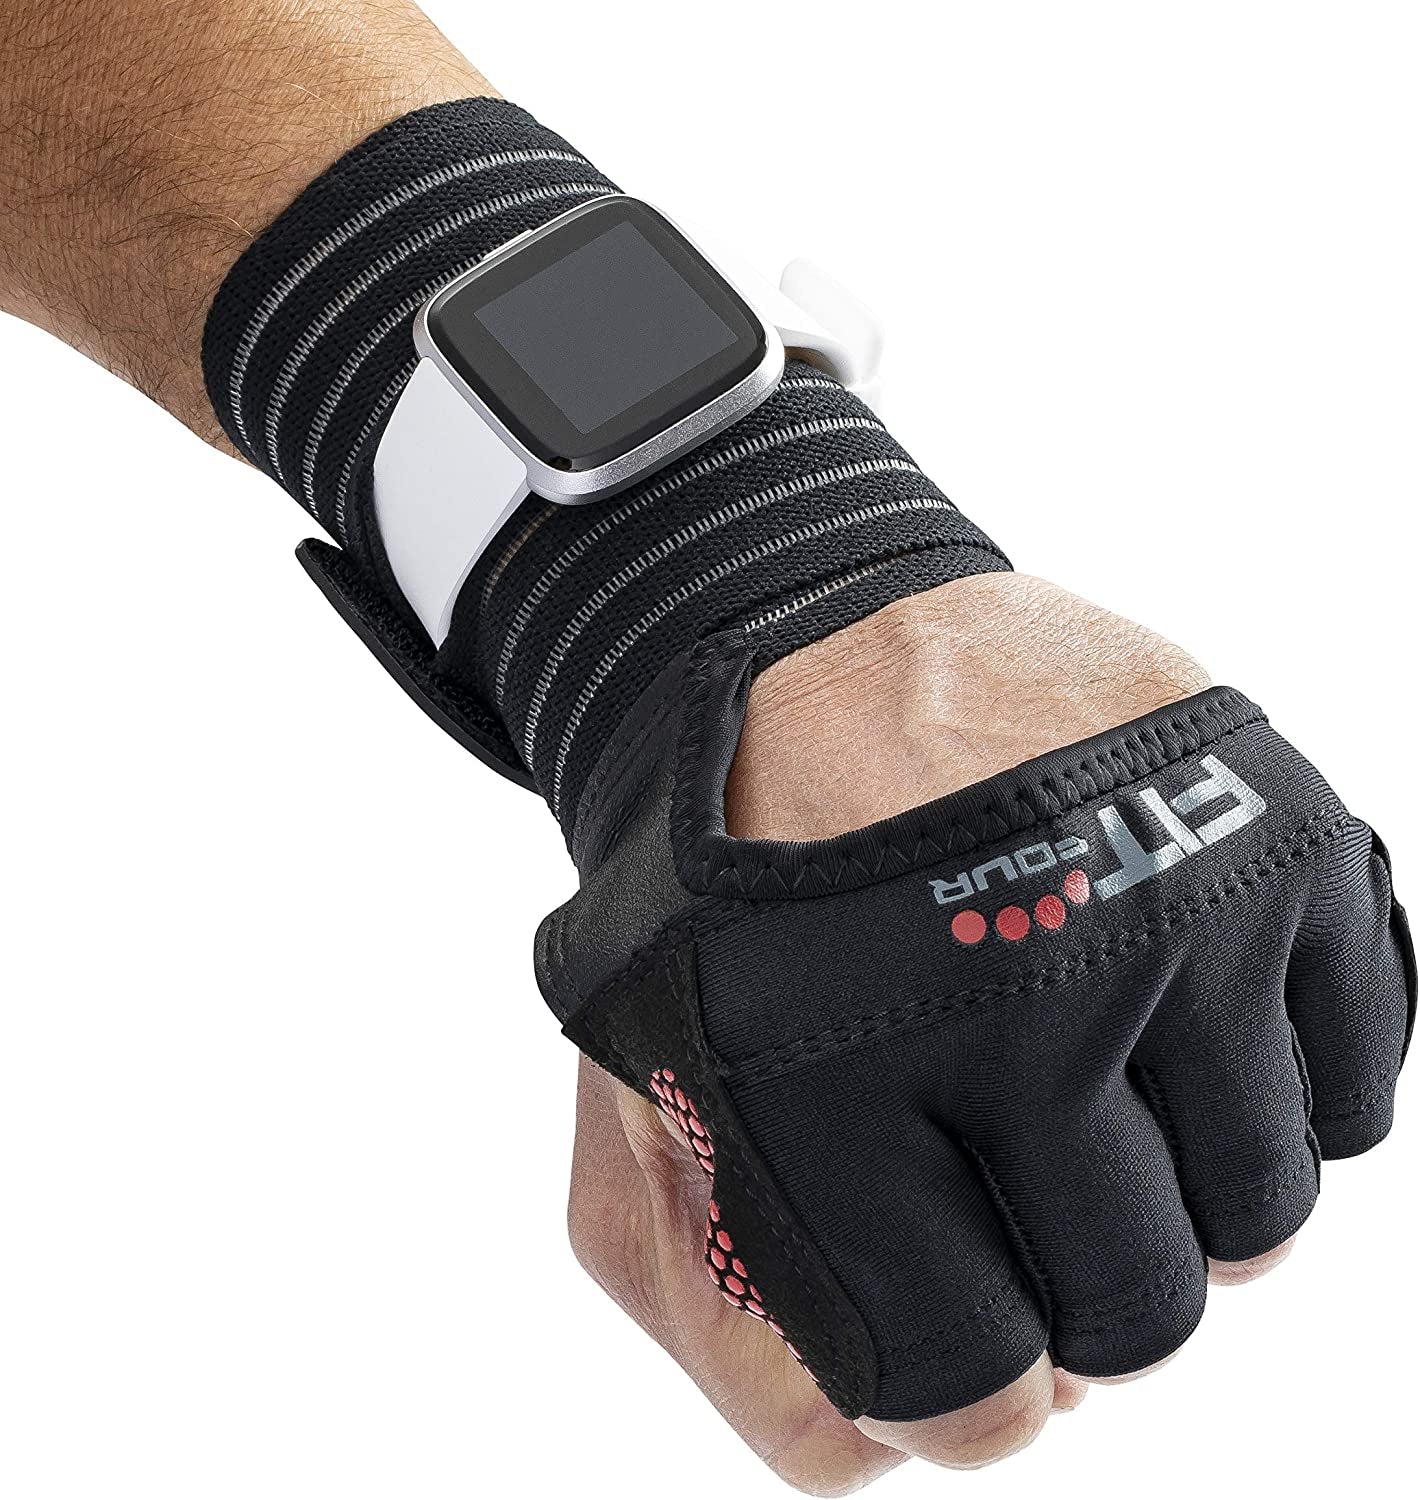 "Crush Every Obstacle with OCR Slit Grip Gloves - Unbeatable Hand Protection for Mud Runs & Obstacle Course Racing | Boost Your Performance with Built-in Wrist Support and Fitness Watch Compatibility"